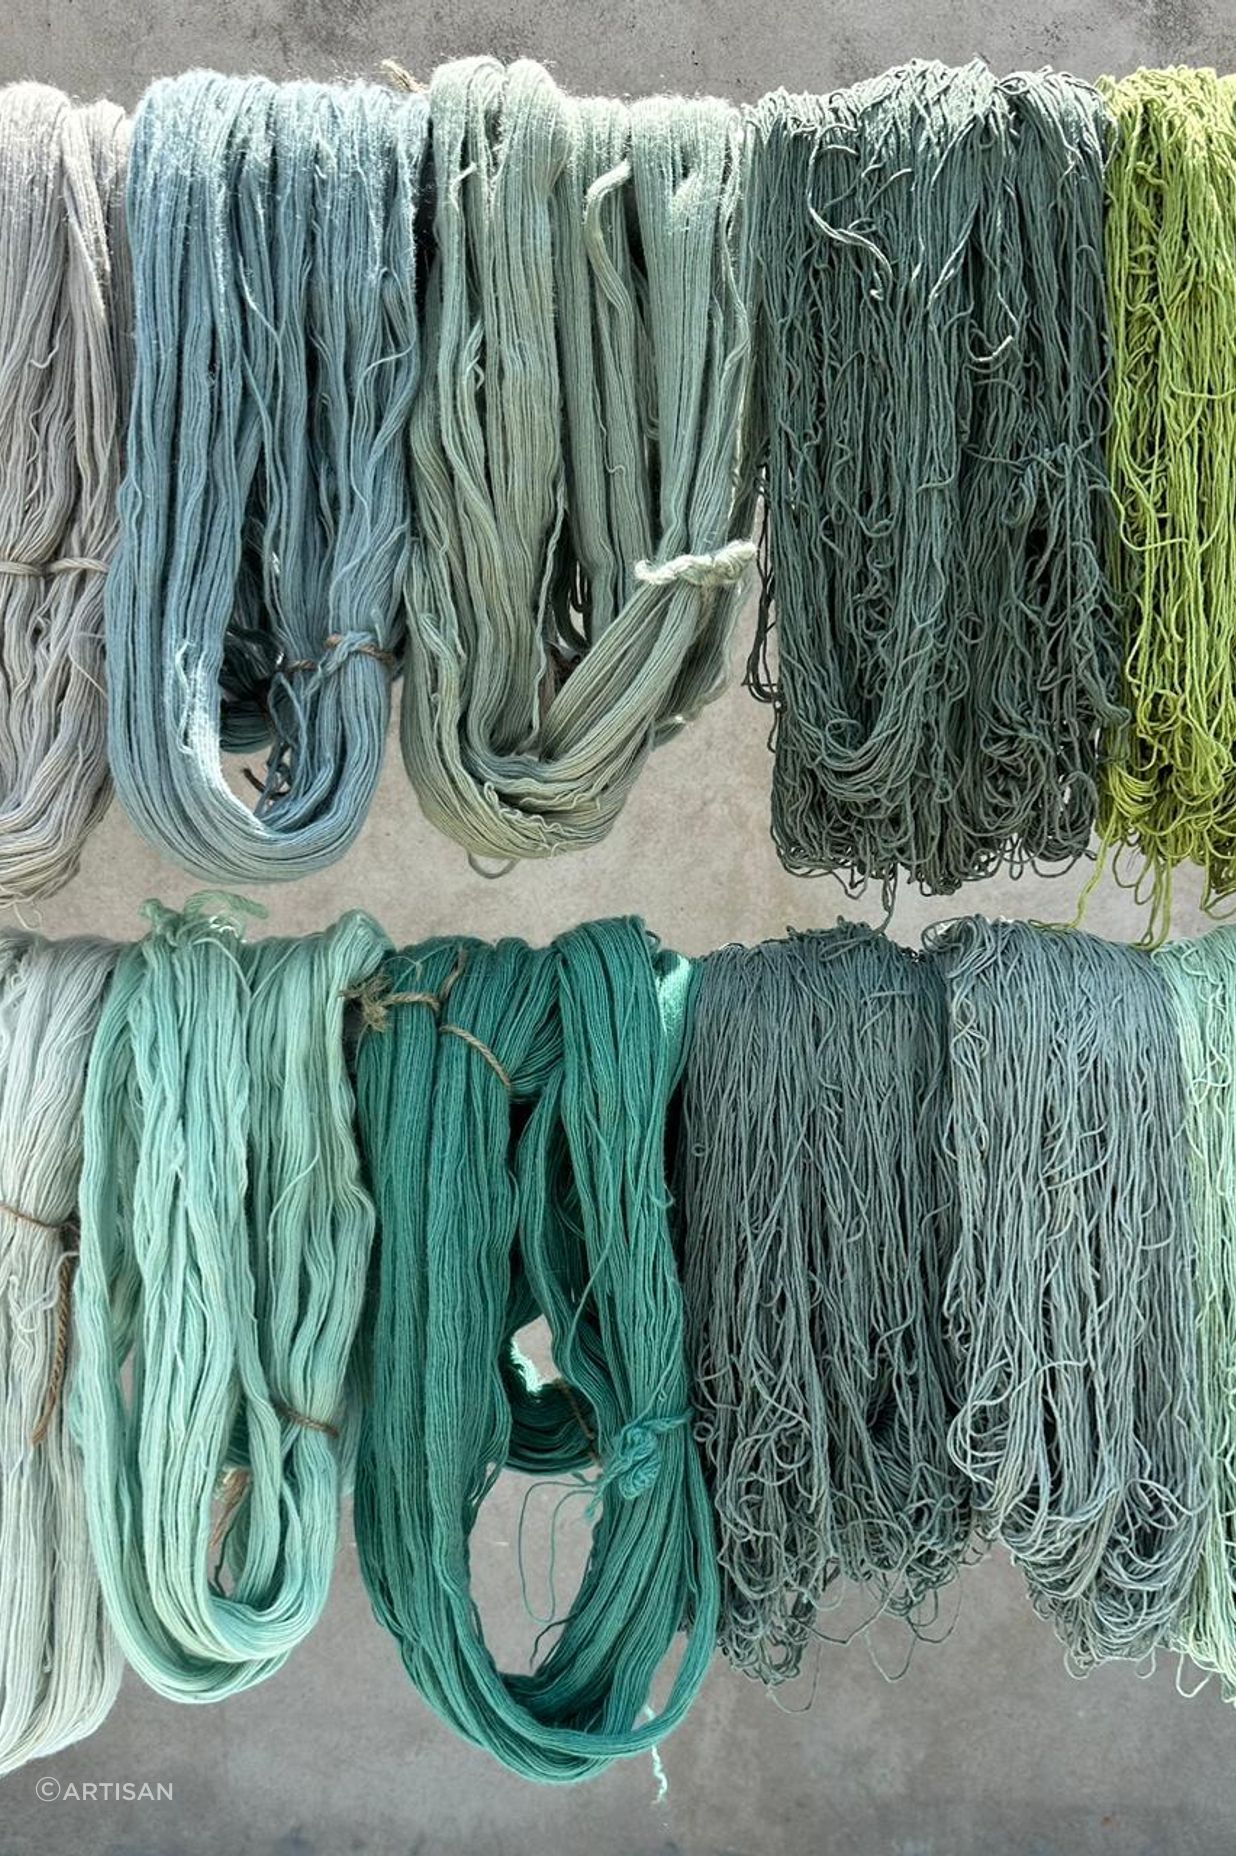 After washing, the yarn is dried.